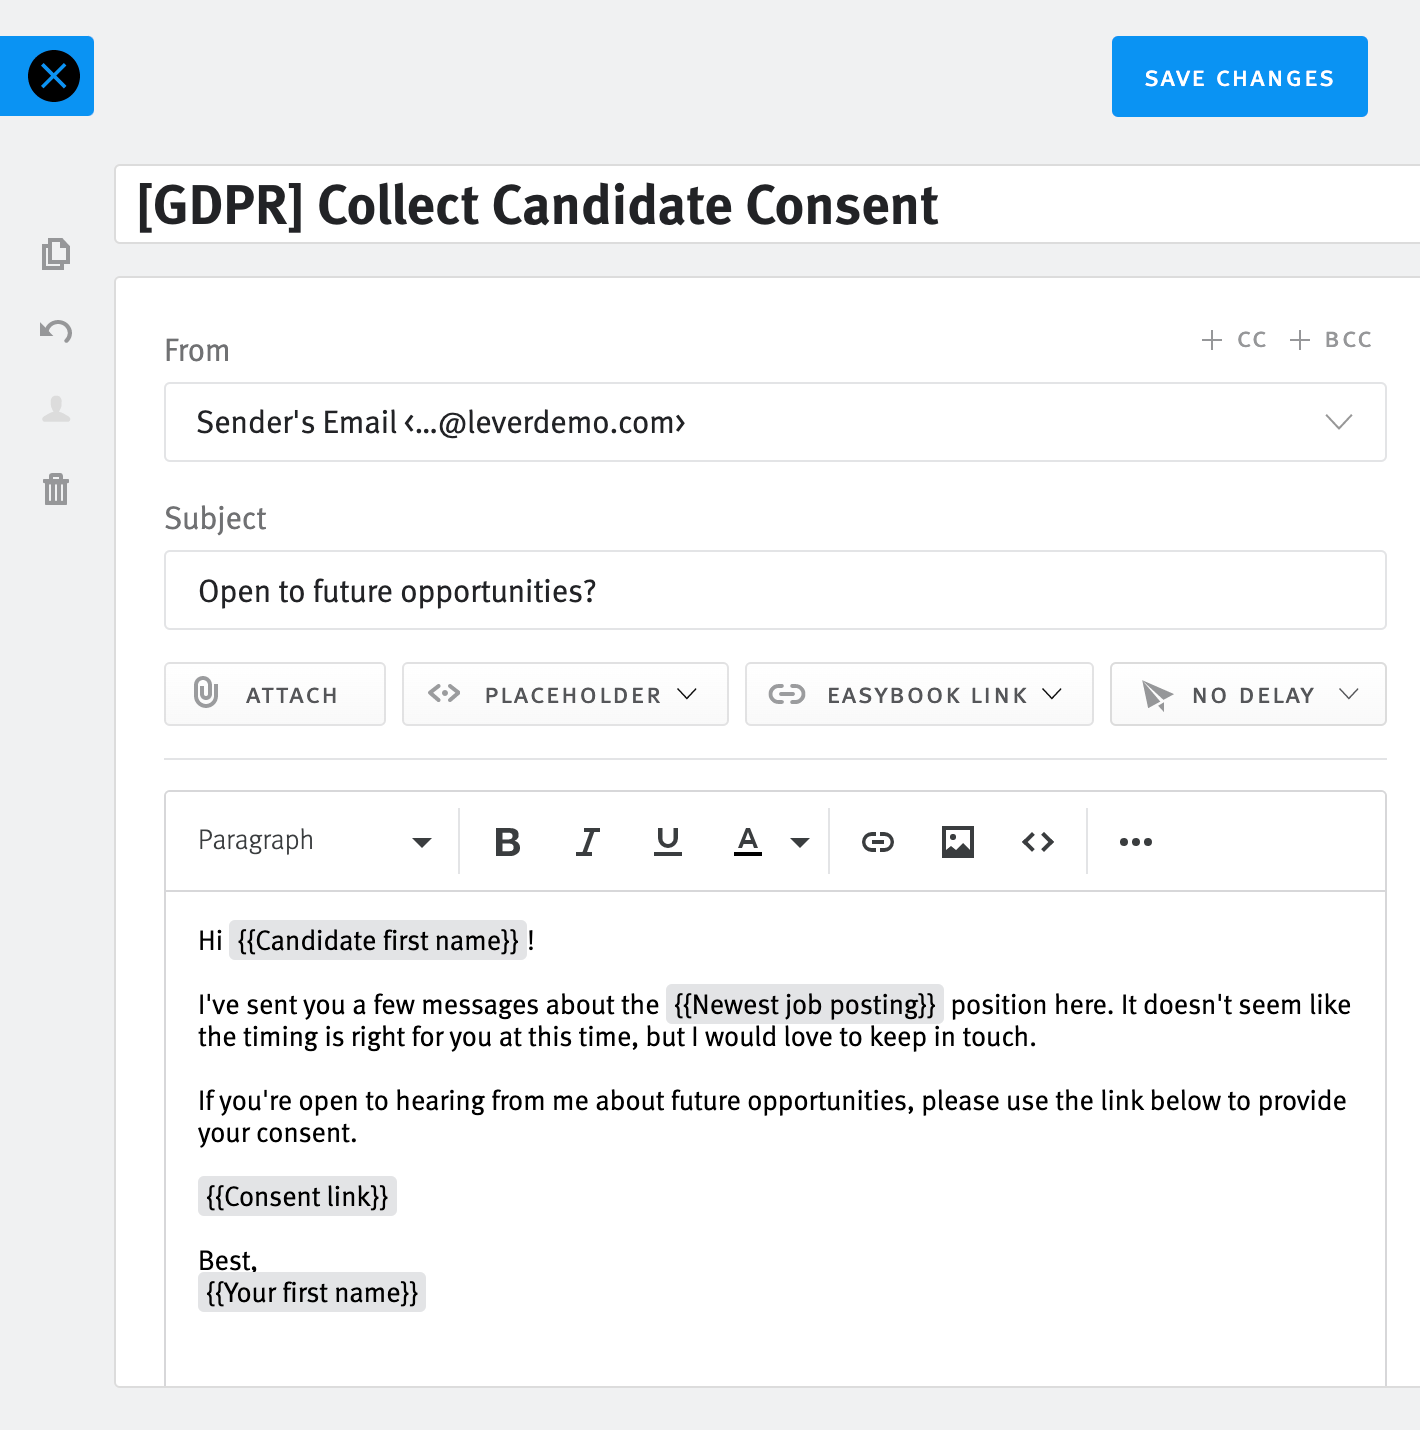 Email template editor, consent link placeholder is contained in body of email template